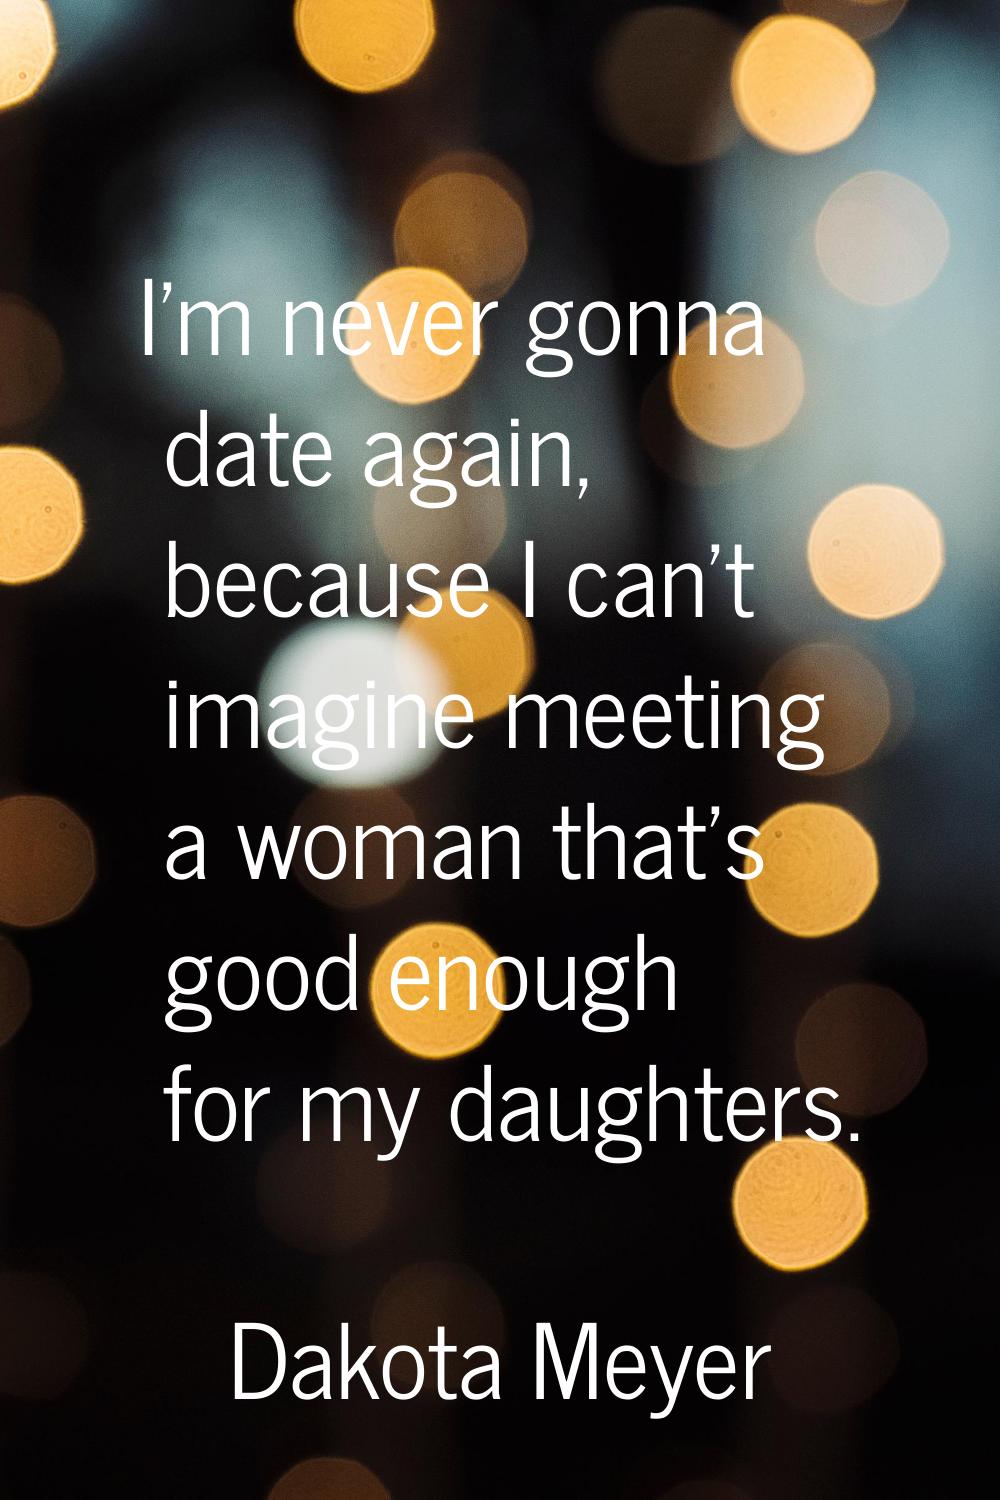 I'm never gonna date again, because I can't imagine meeting a woman that's good enough for my daugh